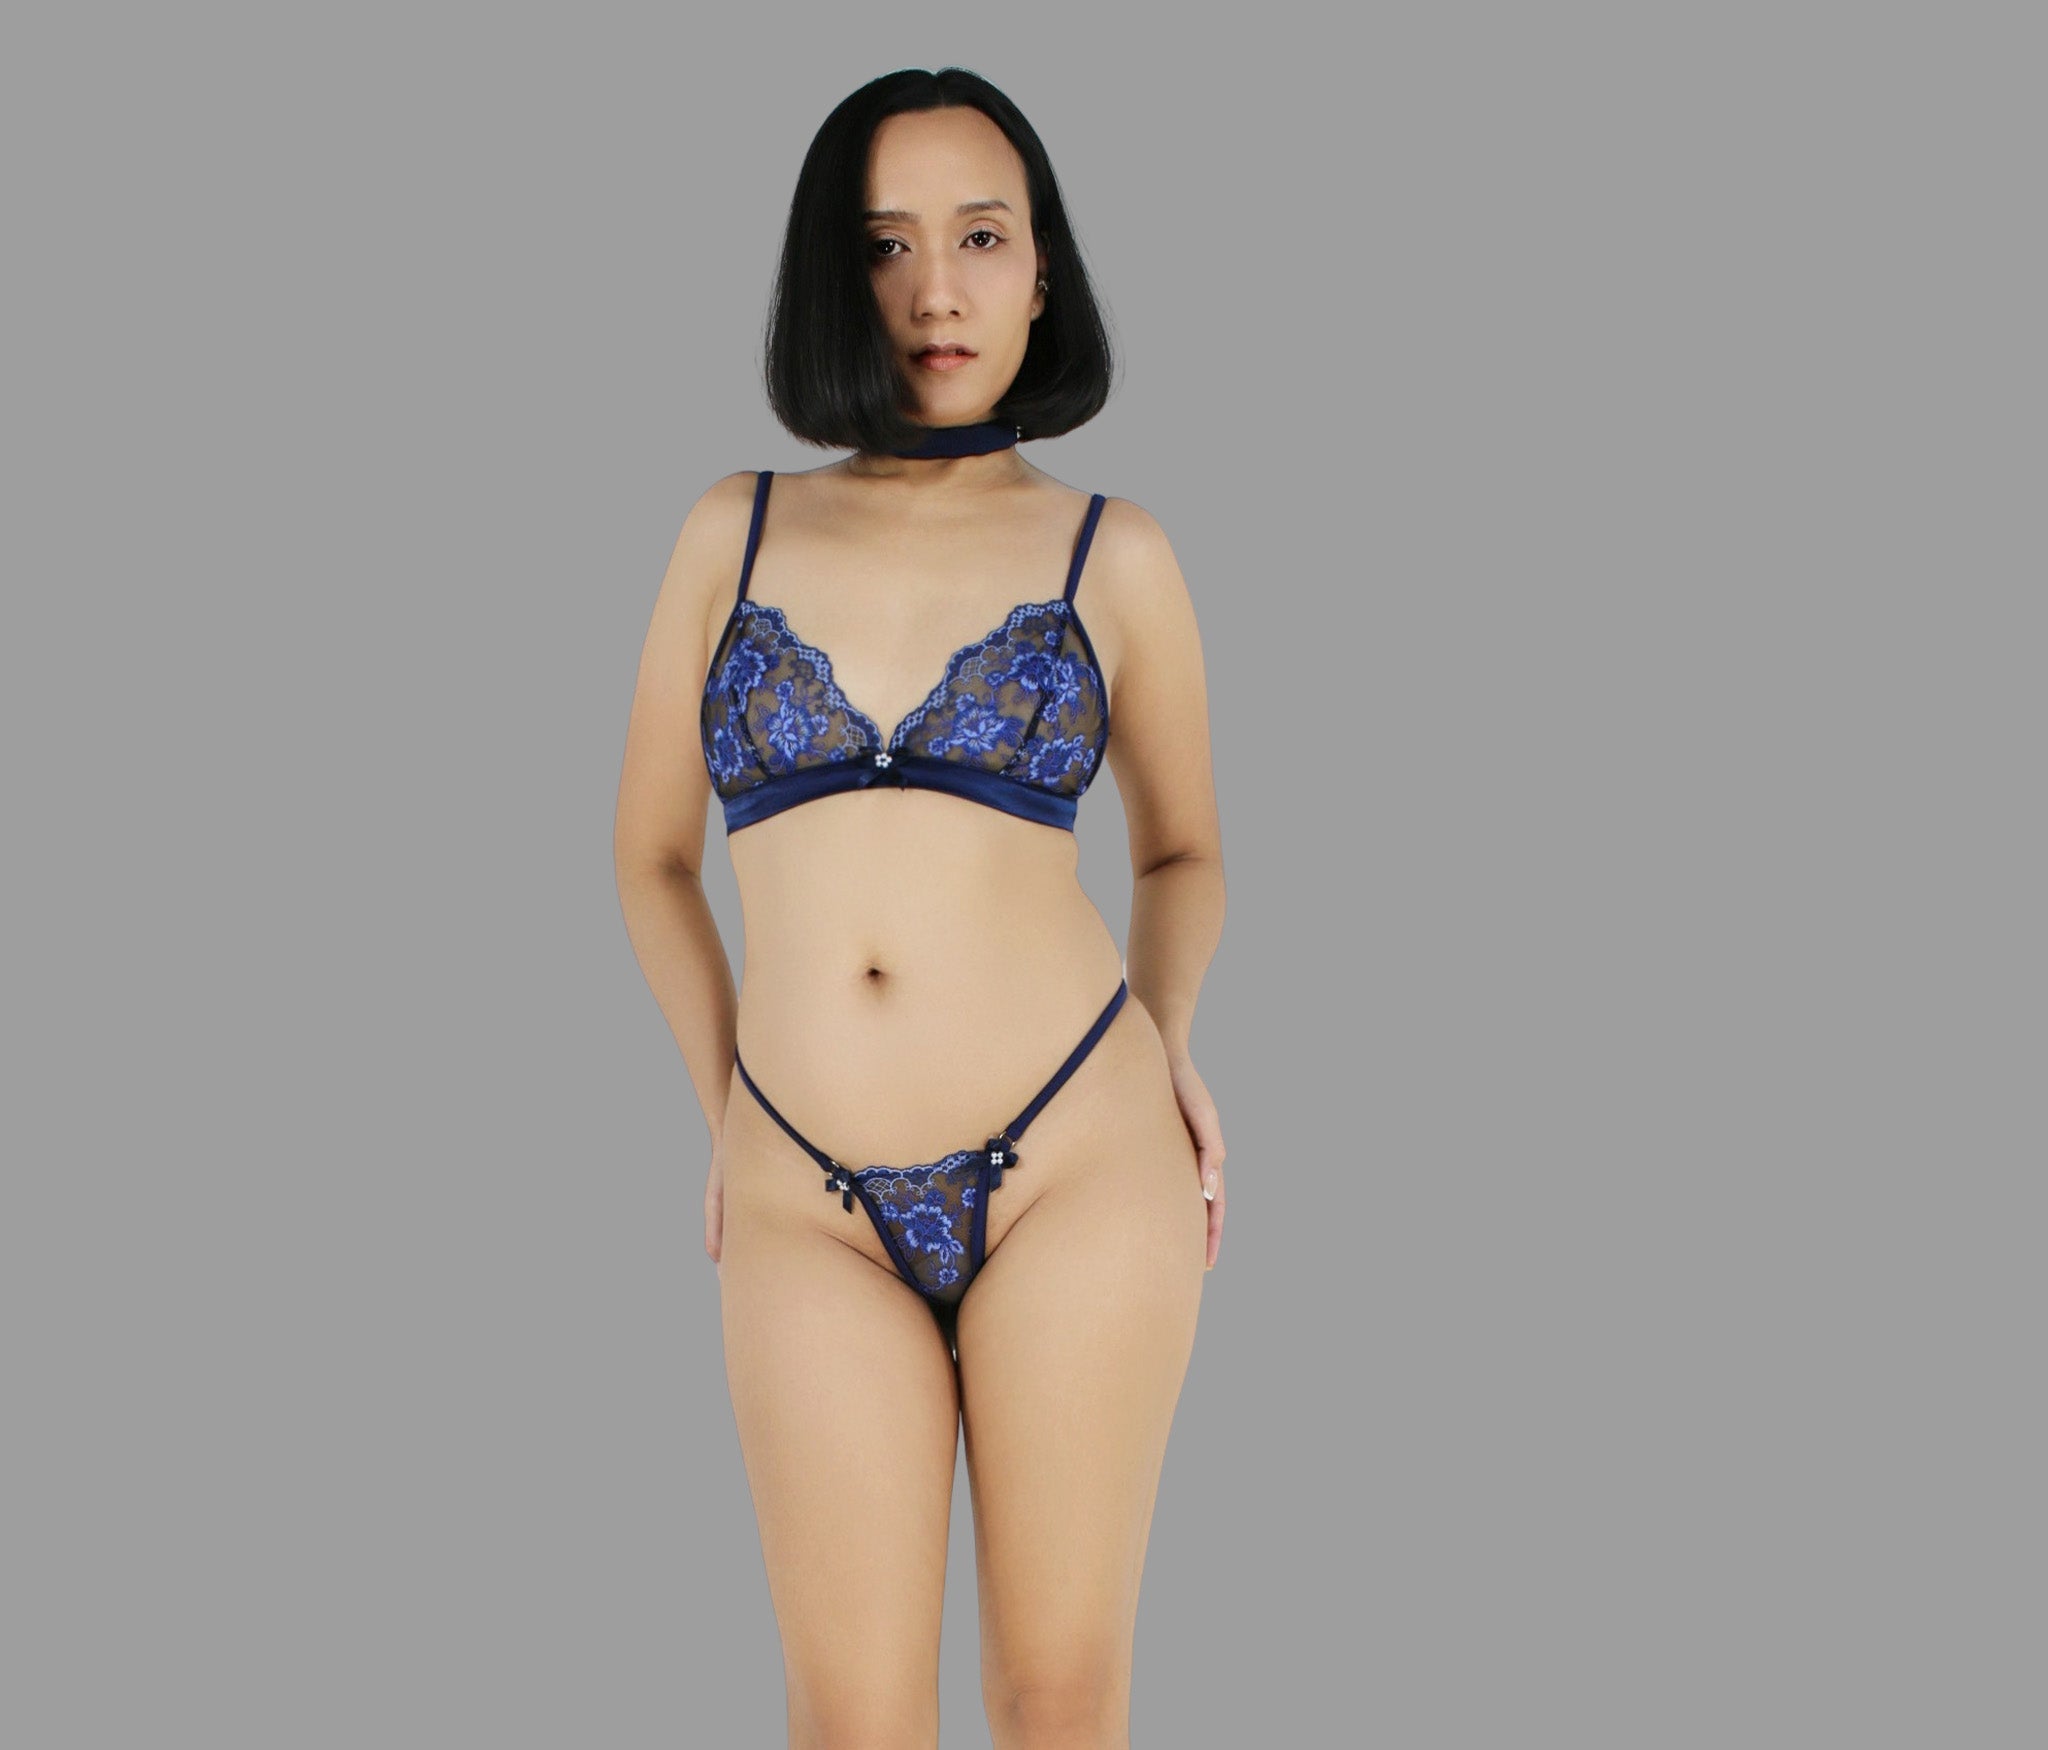 Sheer lingerie set, G string panties bralette and choker in see through blue lace sexy see through lingerie - Ange Déchu